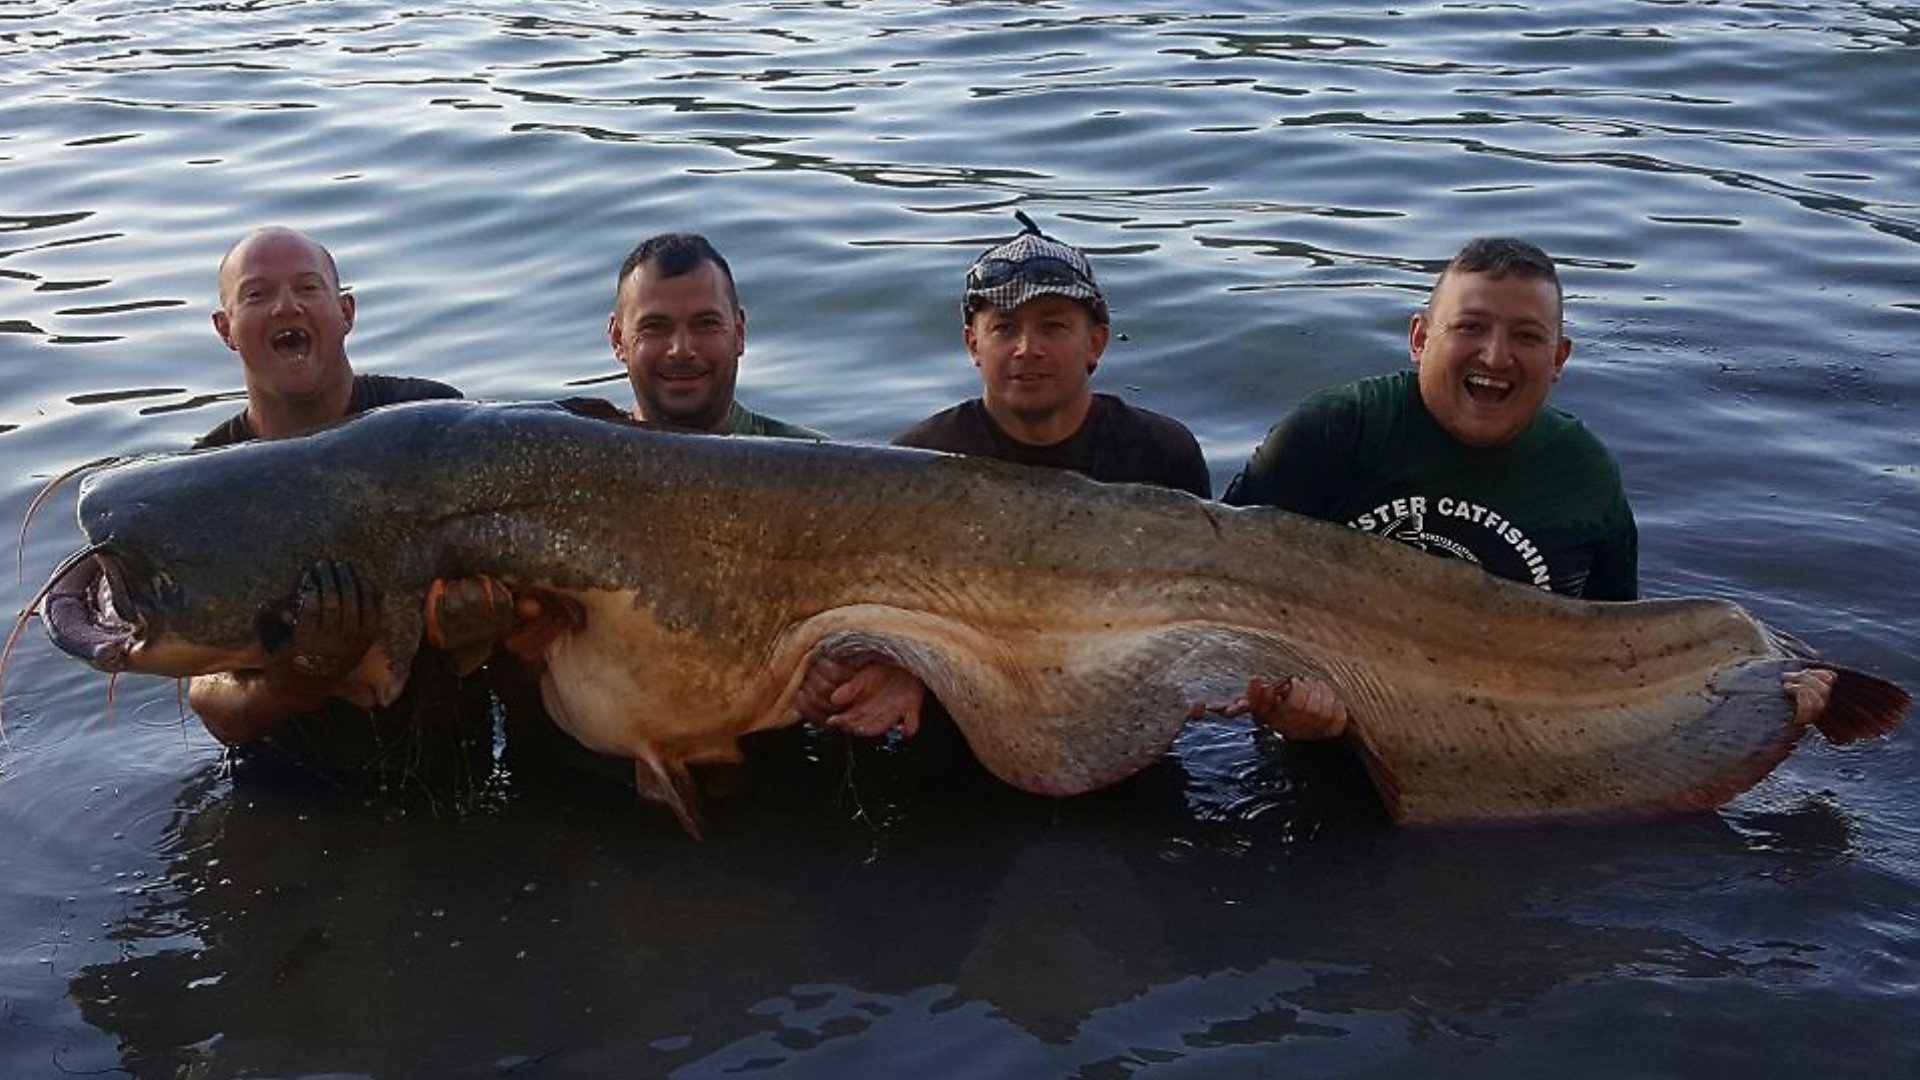 Home Monster Catfishing Tours & Holidays in Spain, River